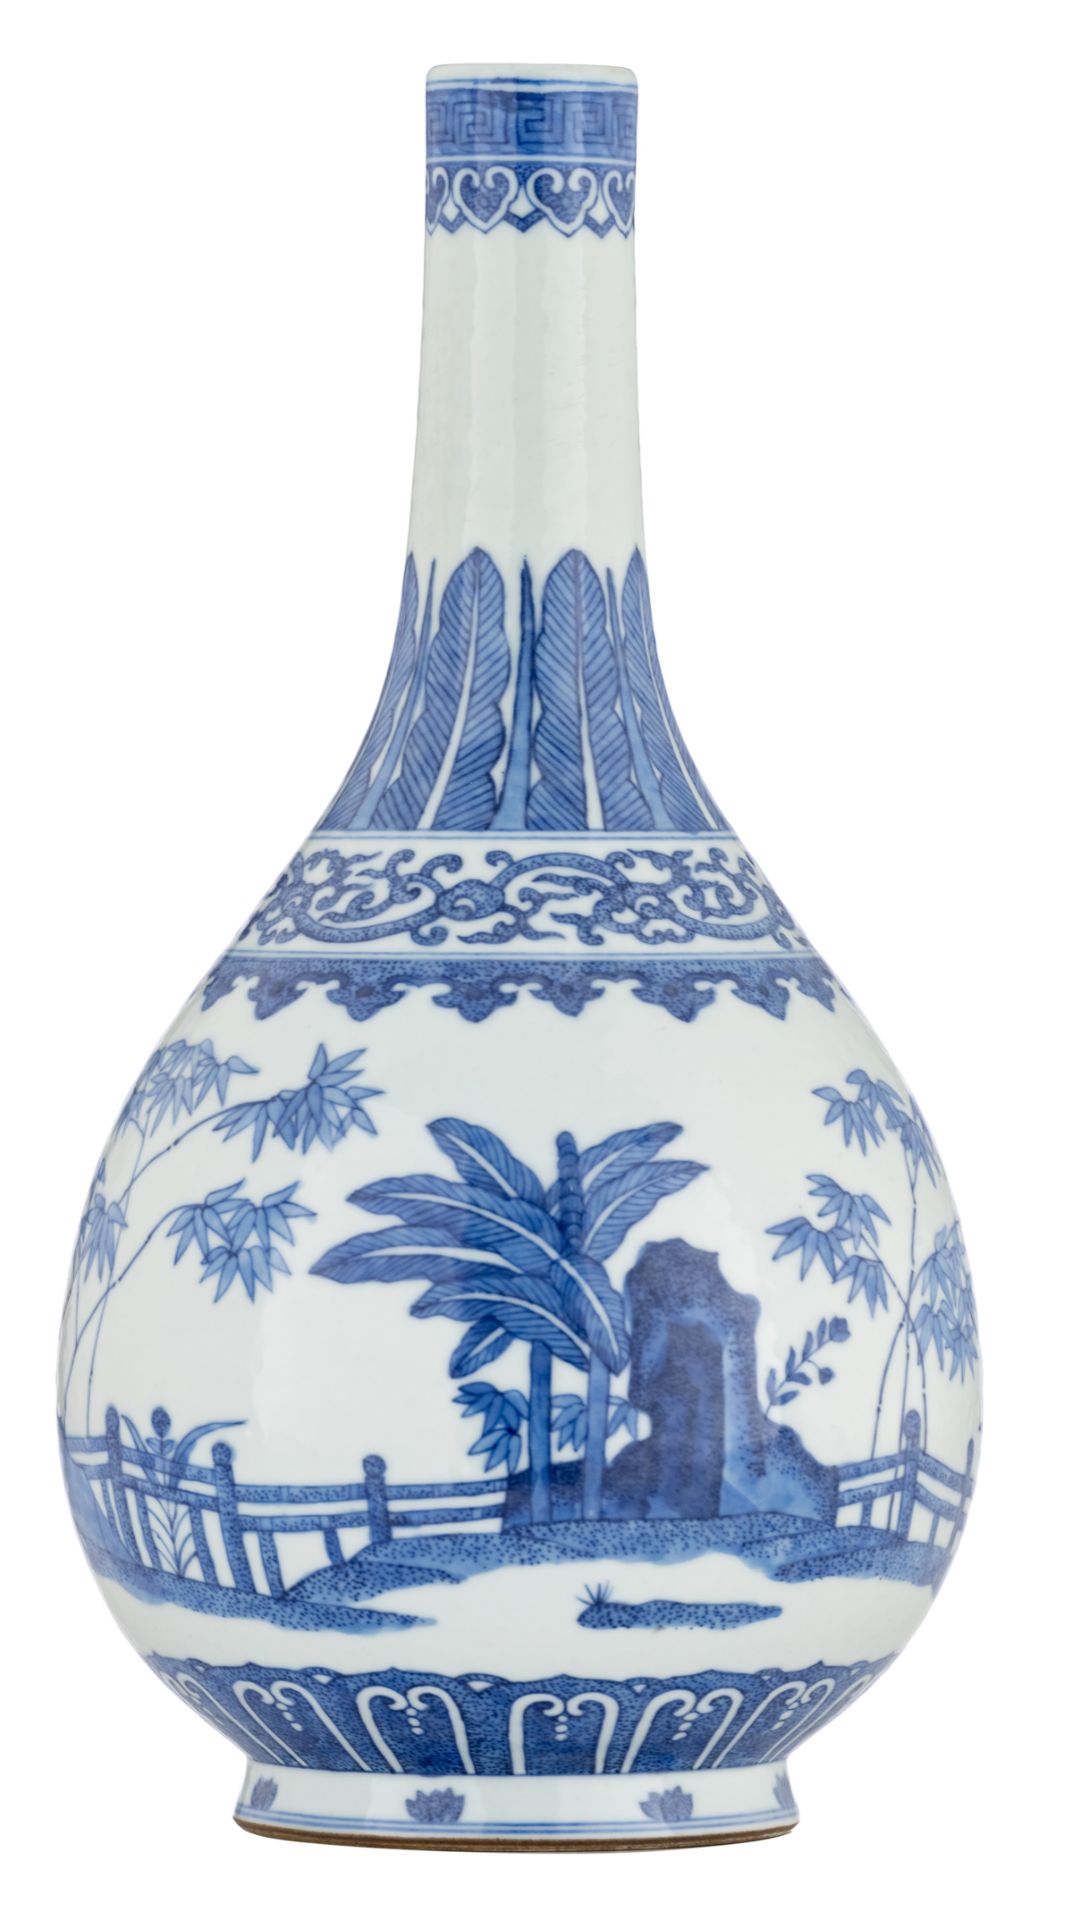 A Chinese blue and white bottle vase, overall decorated with rocks, leaves and bamboo, marked Guangx